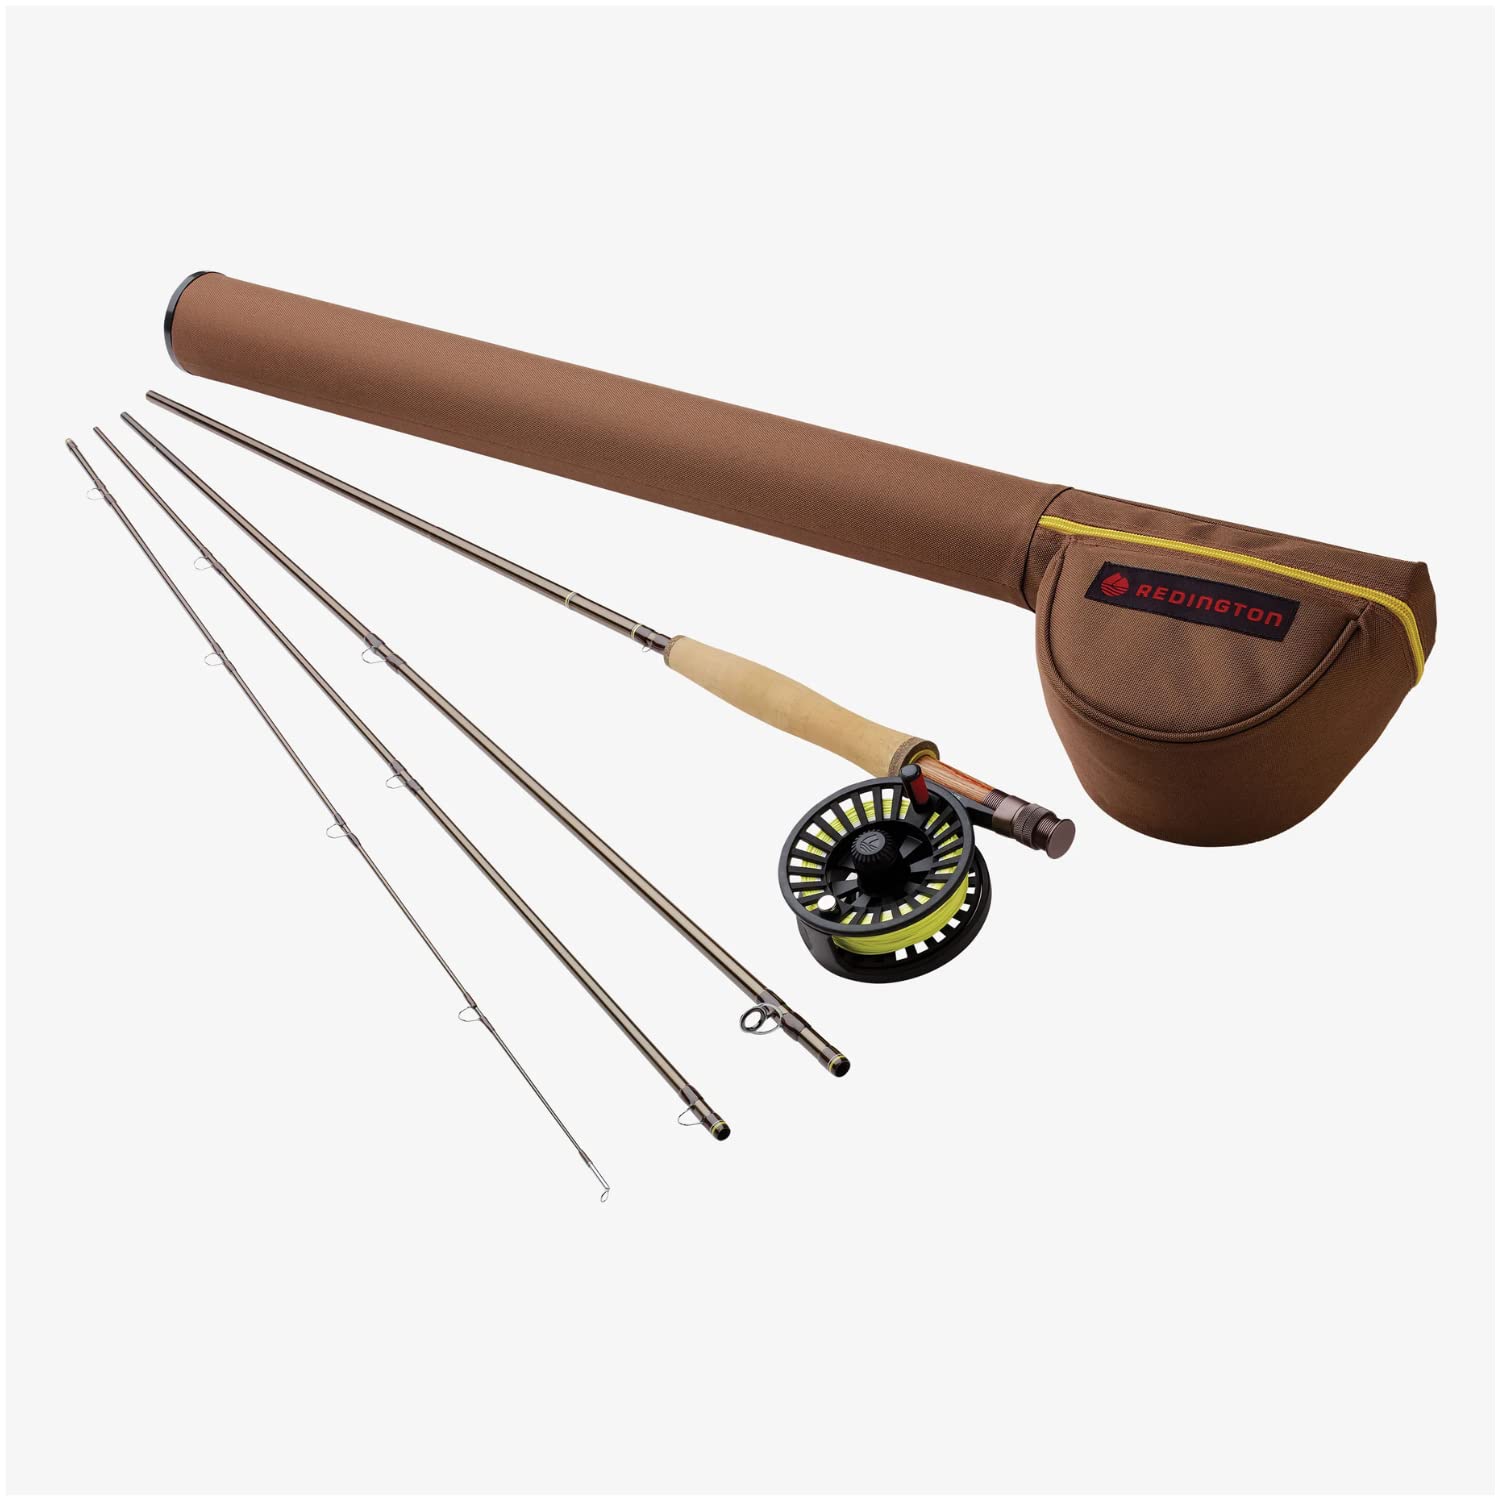 Redington Path Fly Rod Combo Kit with Pre-Spooled Crosswater Reel, Medium-Fast  Action Rod 890-4